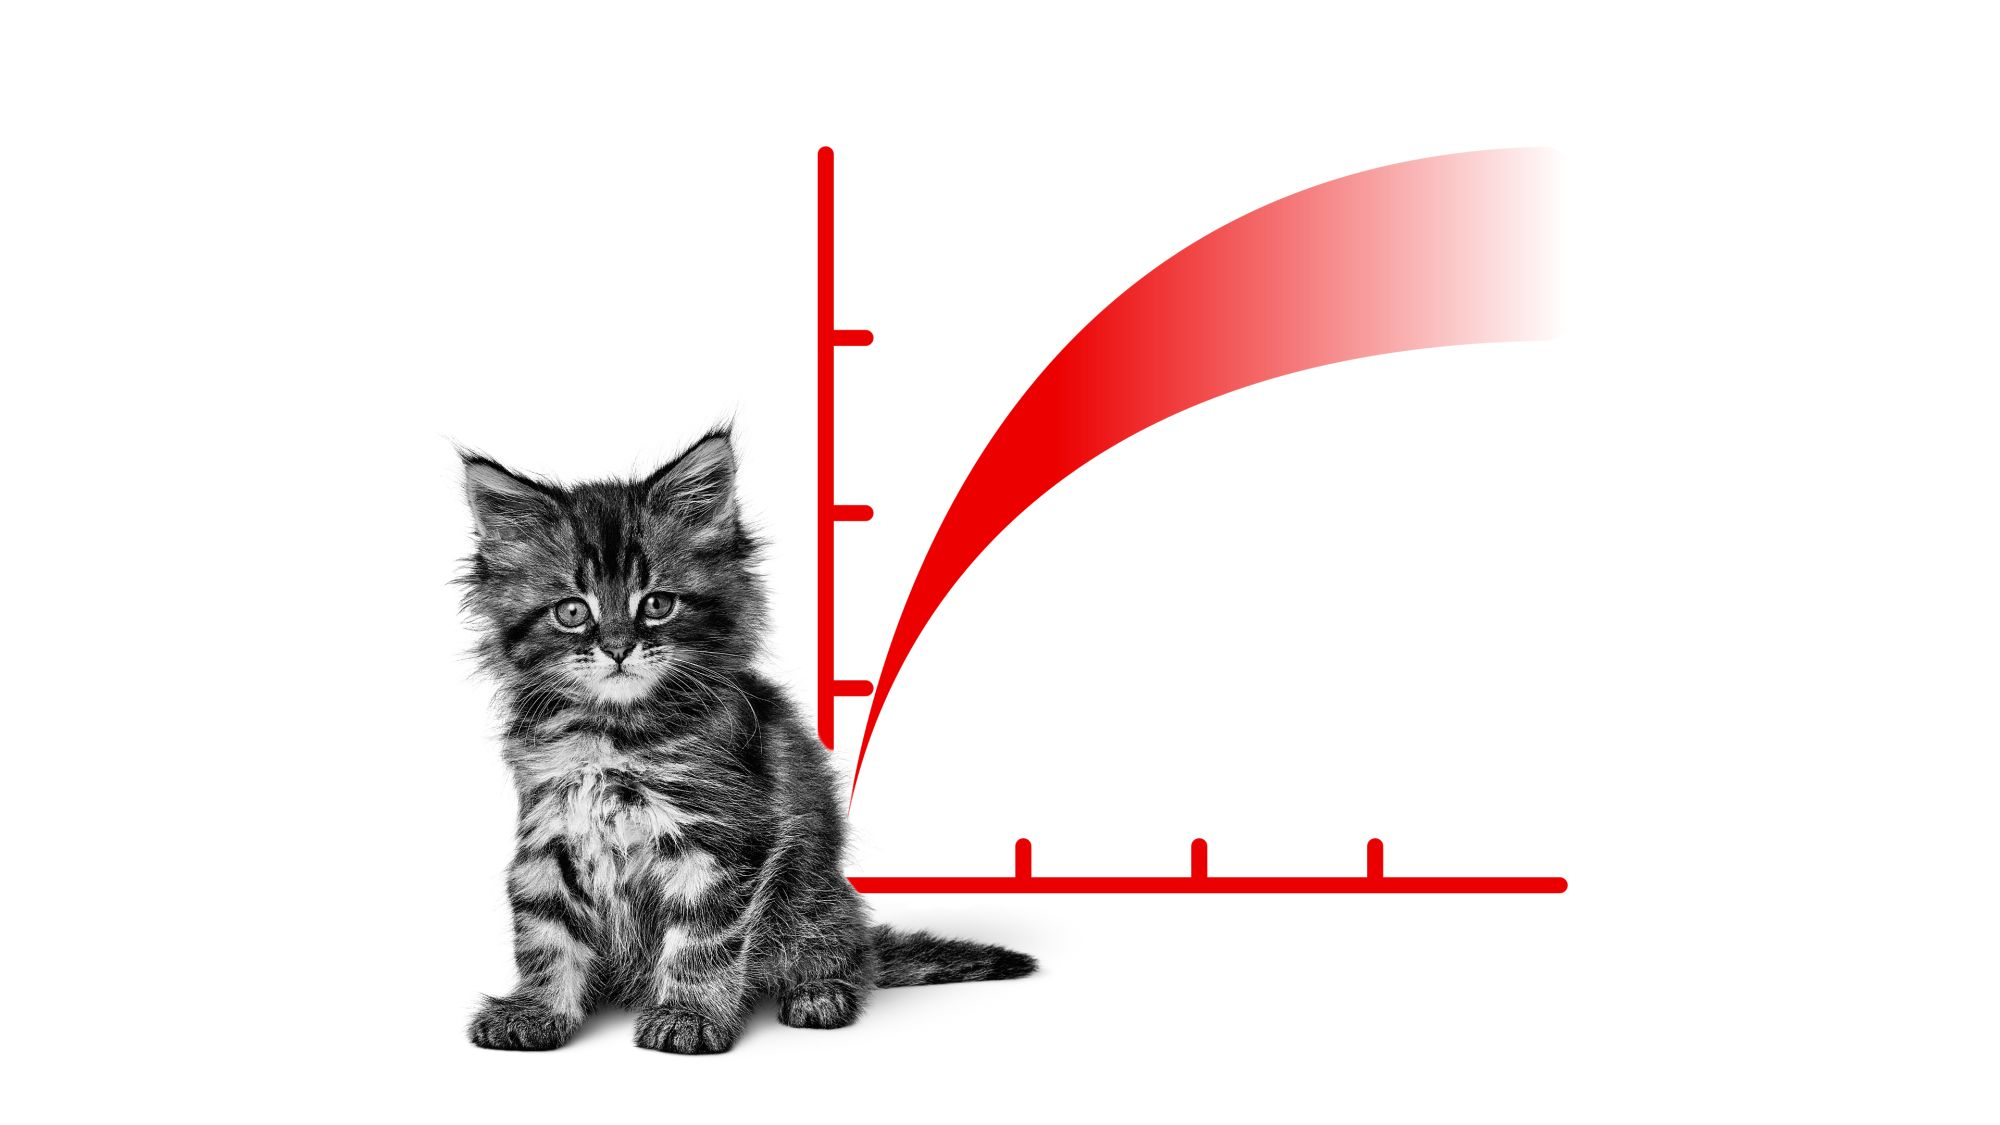 Maine Coon kitten in black and white lying down in front of a growth curve illustration